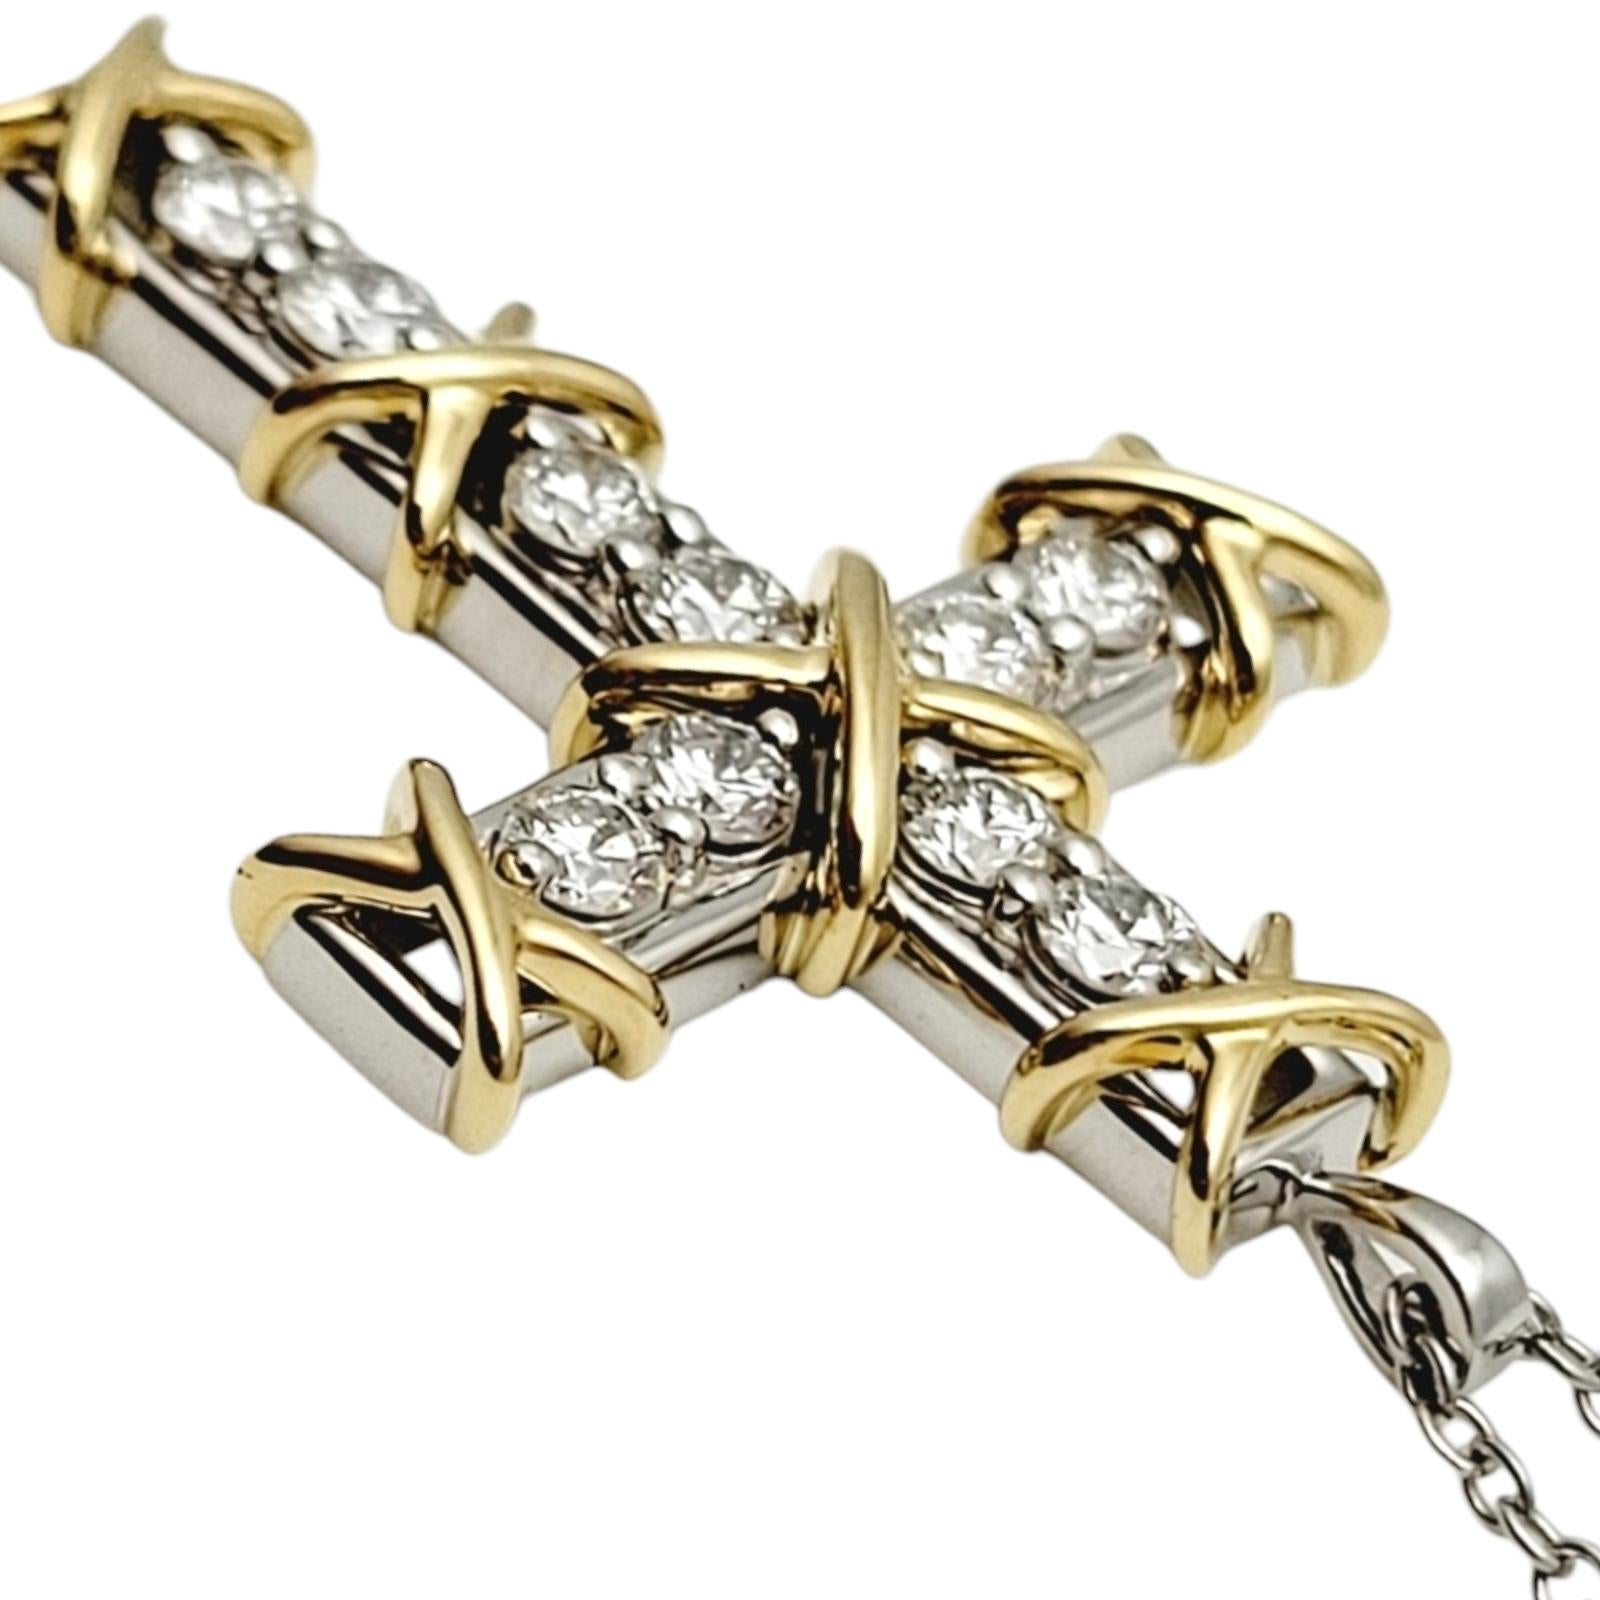 Contemporary Tiffany & Co. Schlumberger Diamond Ten Stone Gold and Platinum Cross Necklace 